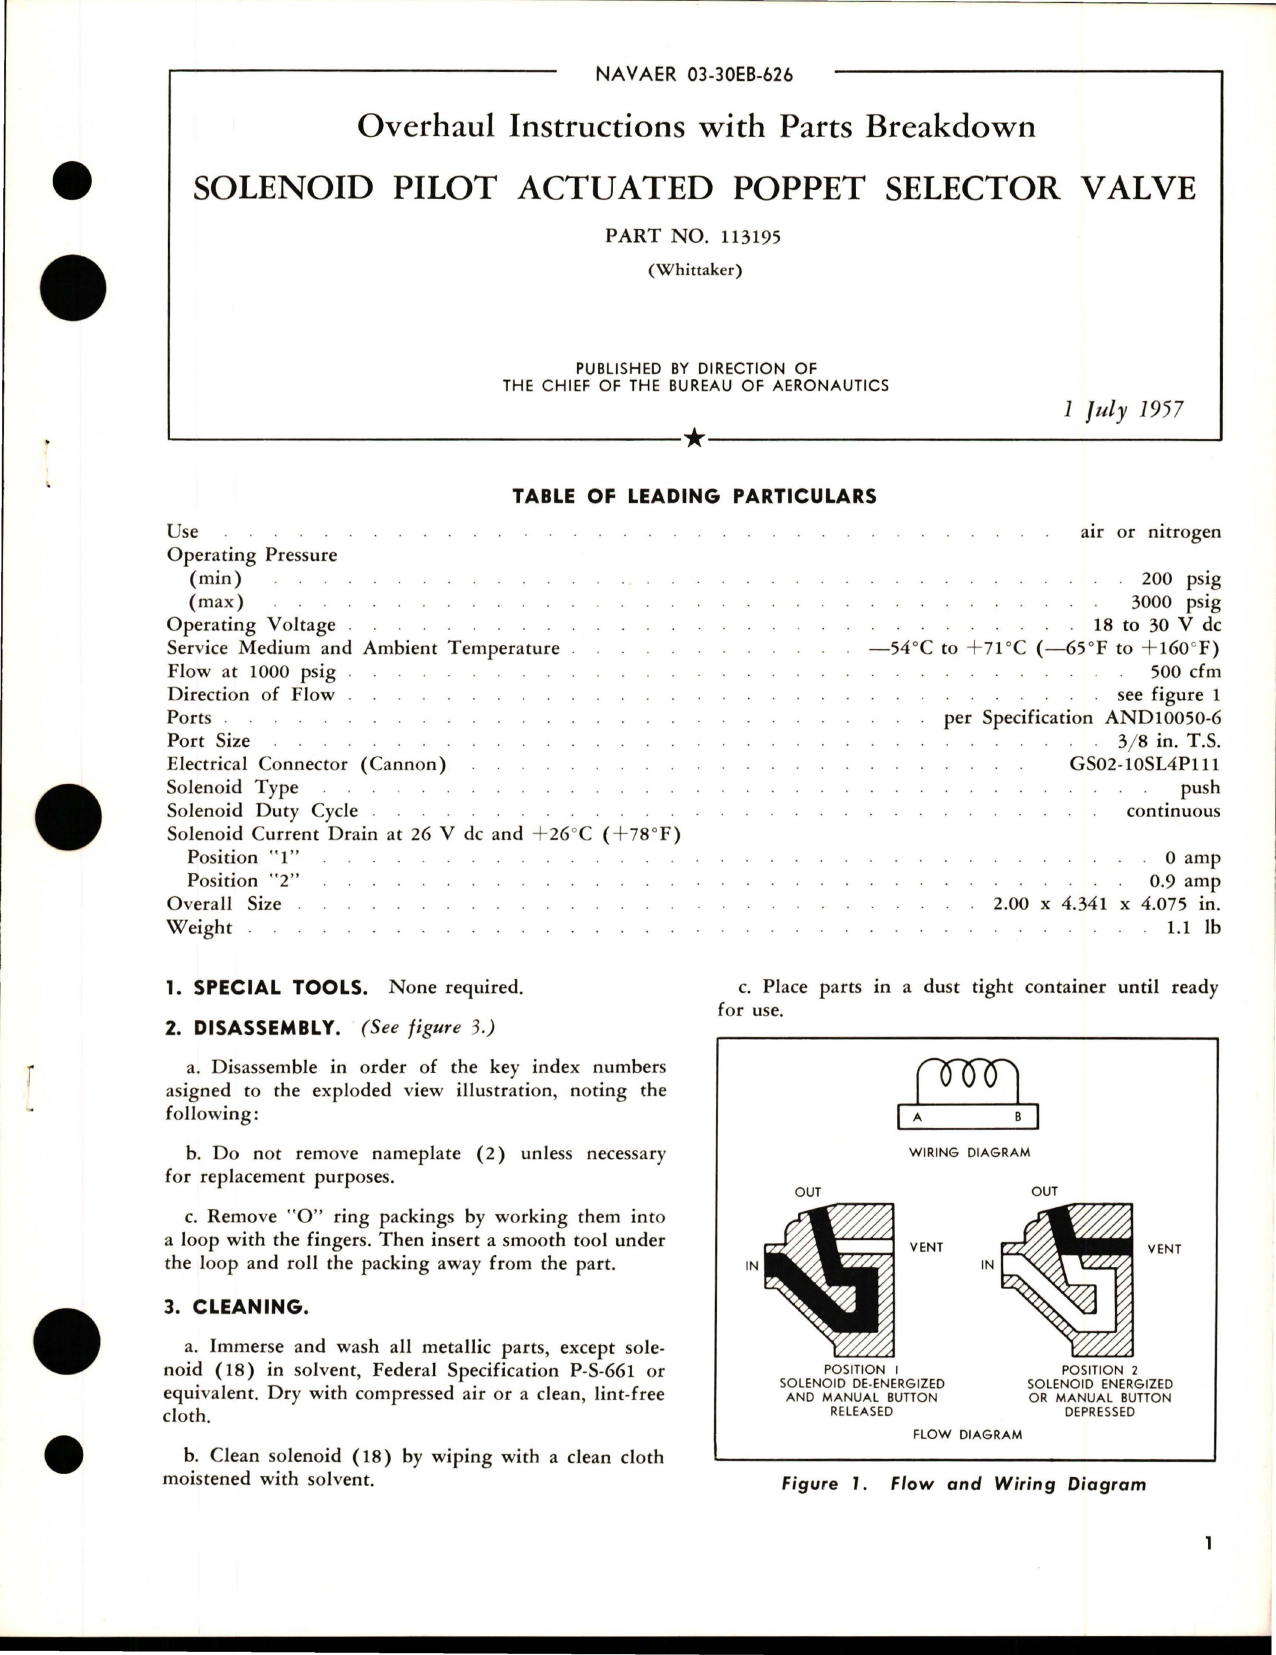 Sample page 1 from AirCorps Library document: Overhaul Instructions with Parts Breakdown for Solenoid Pilot Actuated Poppet Selector Valve - Part 113195